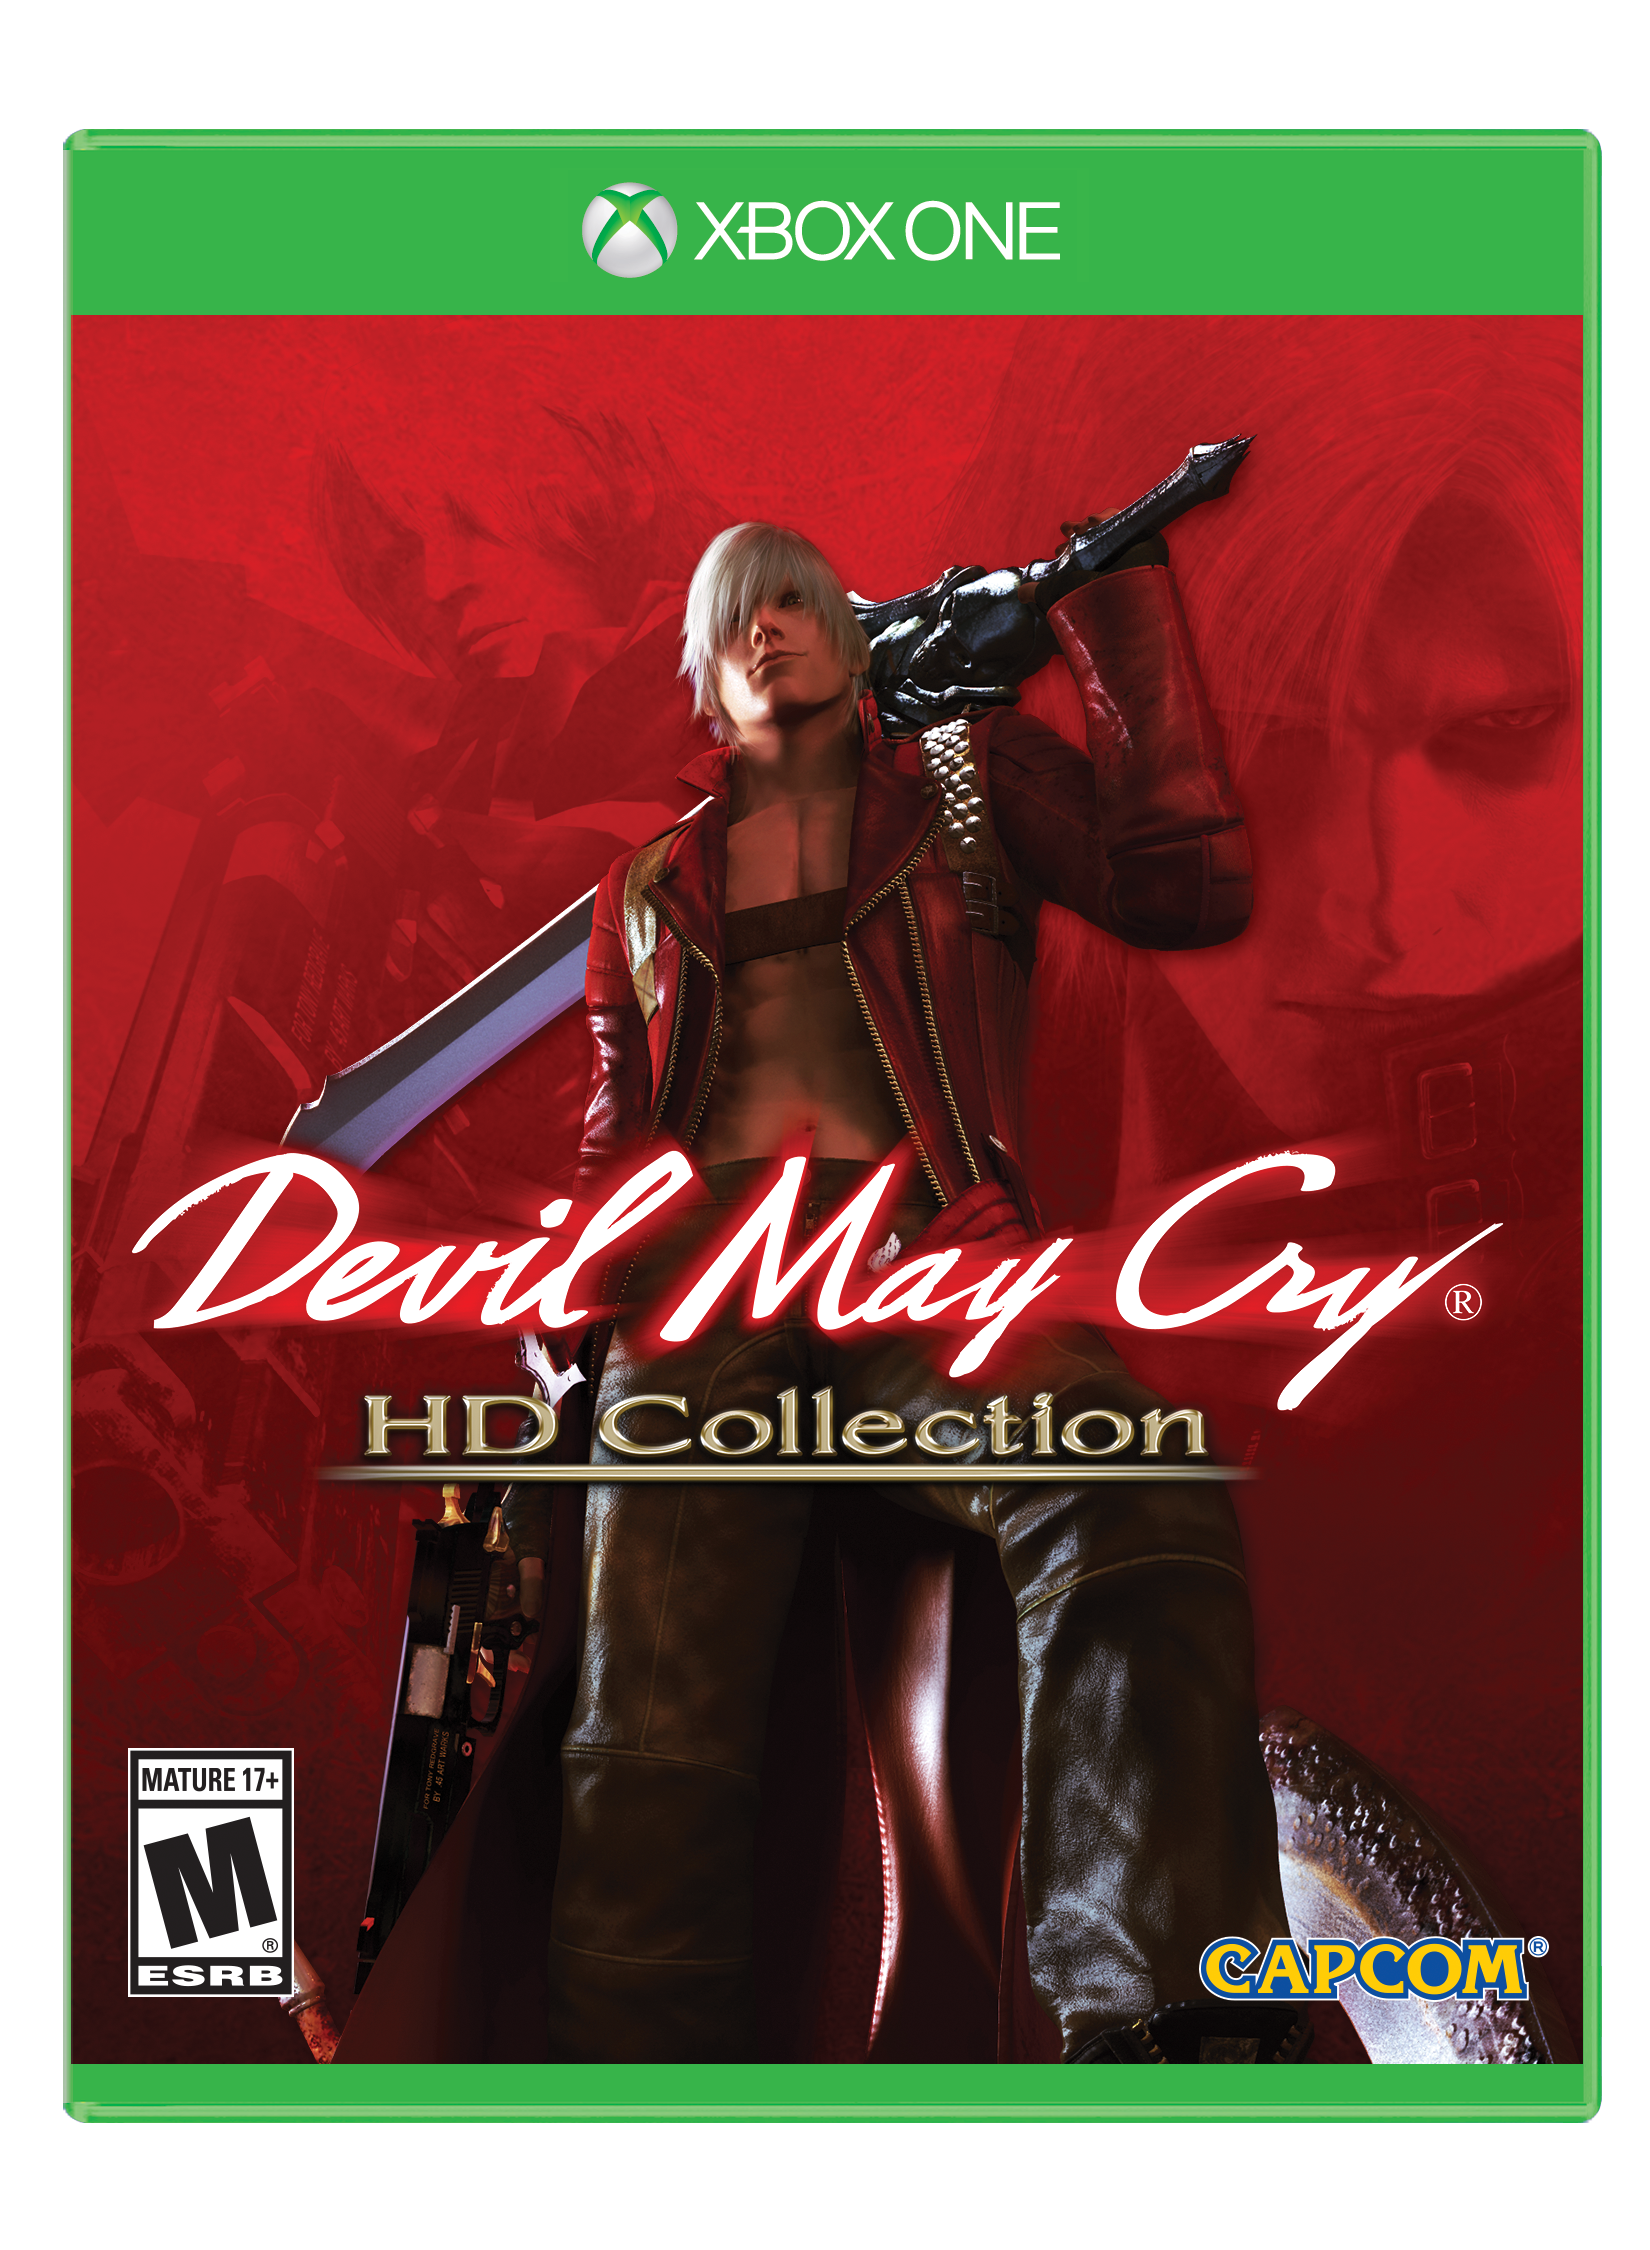 Devil May Cry HD Collection, Capcom, Xbox One, 013388550357 - image 1 of 10